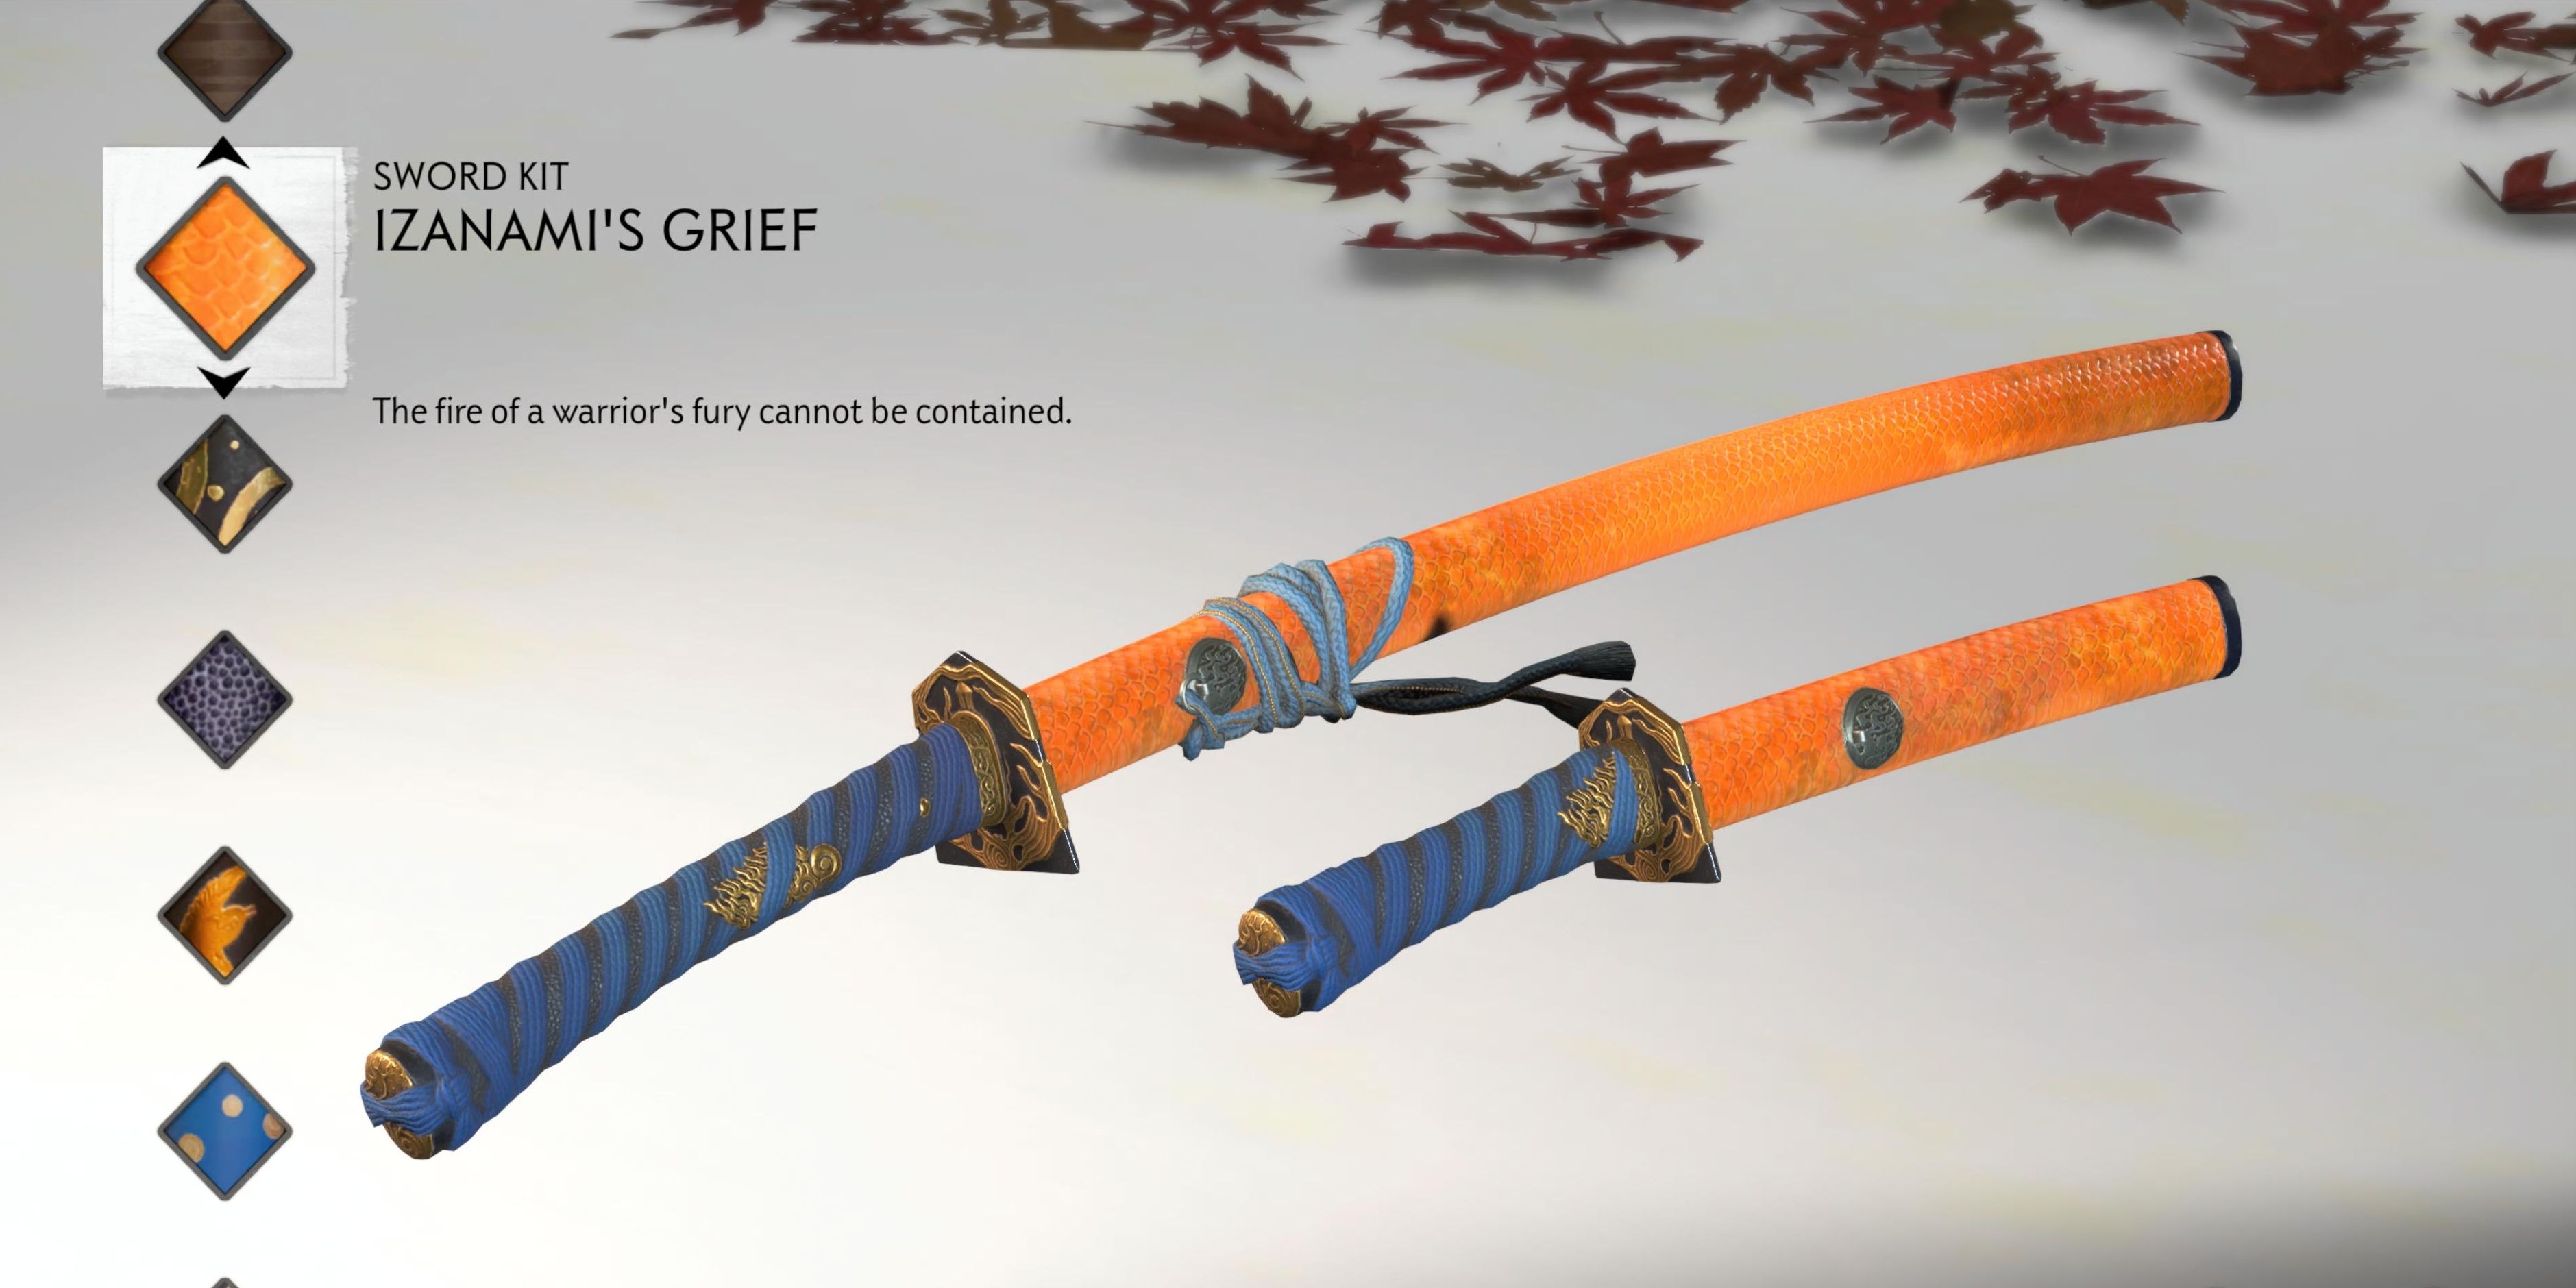 The Izanami's Grief sword kit as shown in Ghost of Tsushima's inventory screen 